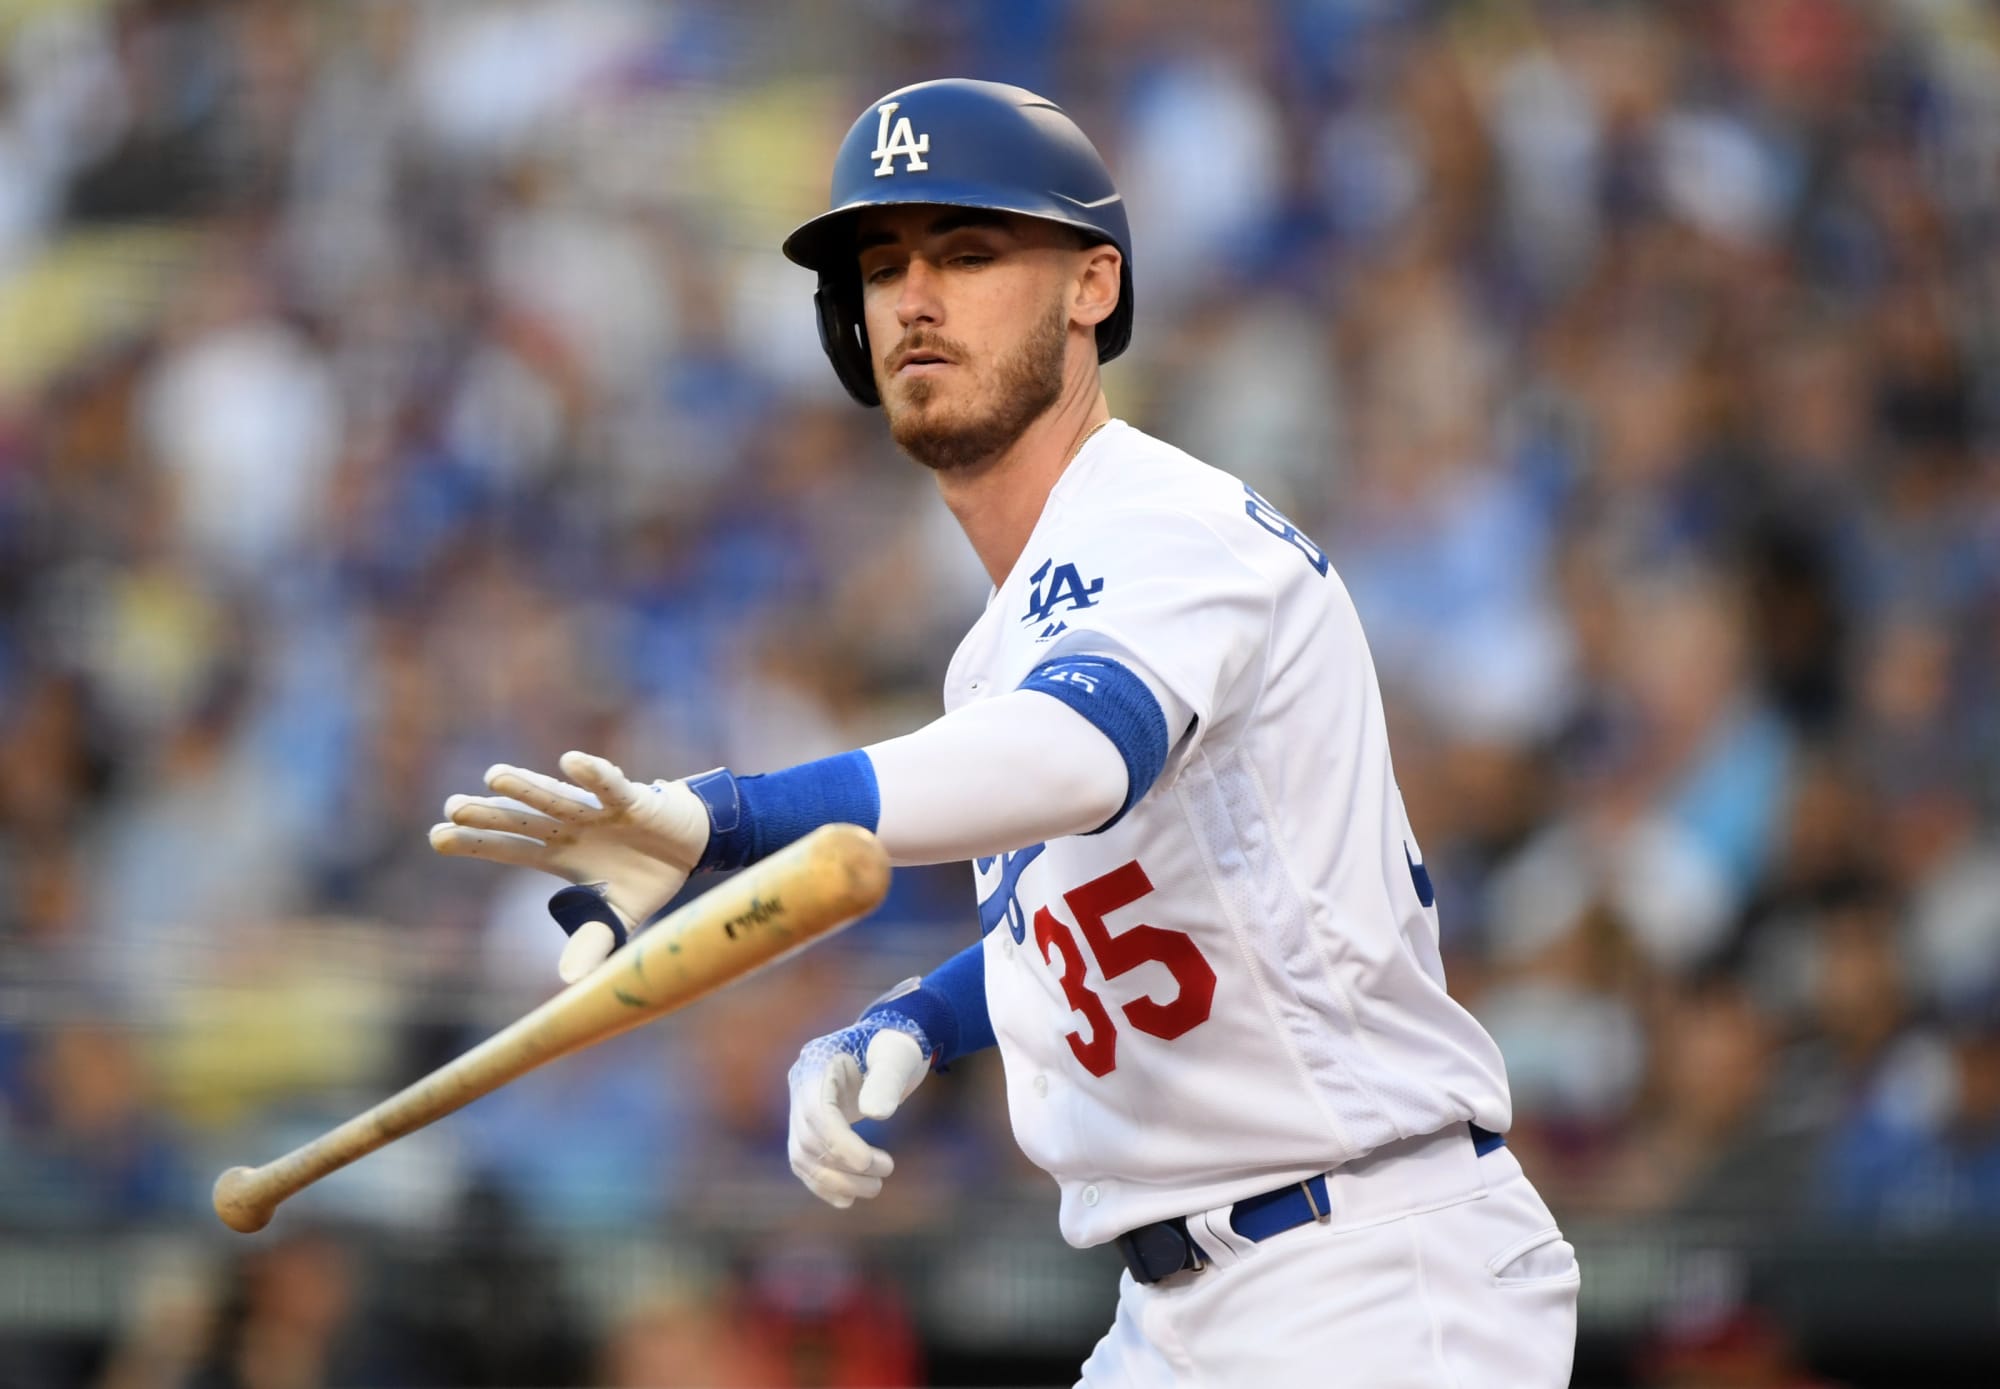 Los Angeles Dodgers 2019 is The Year of Cody Bellinger